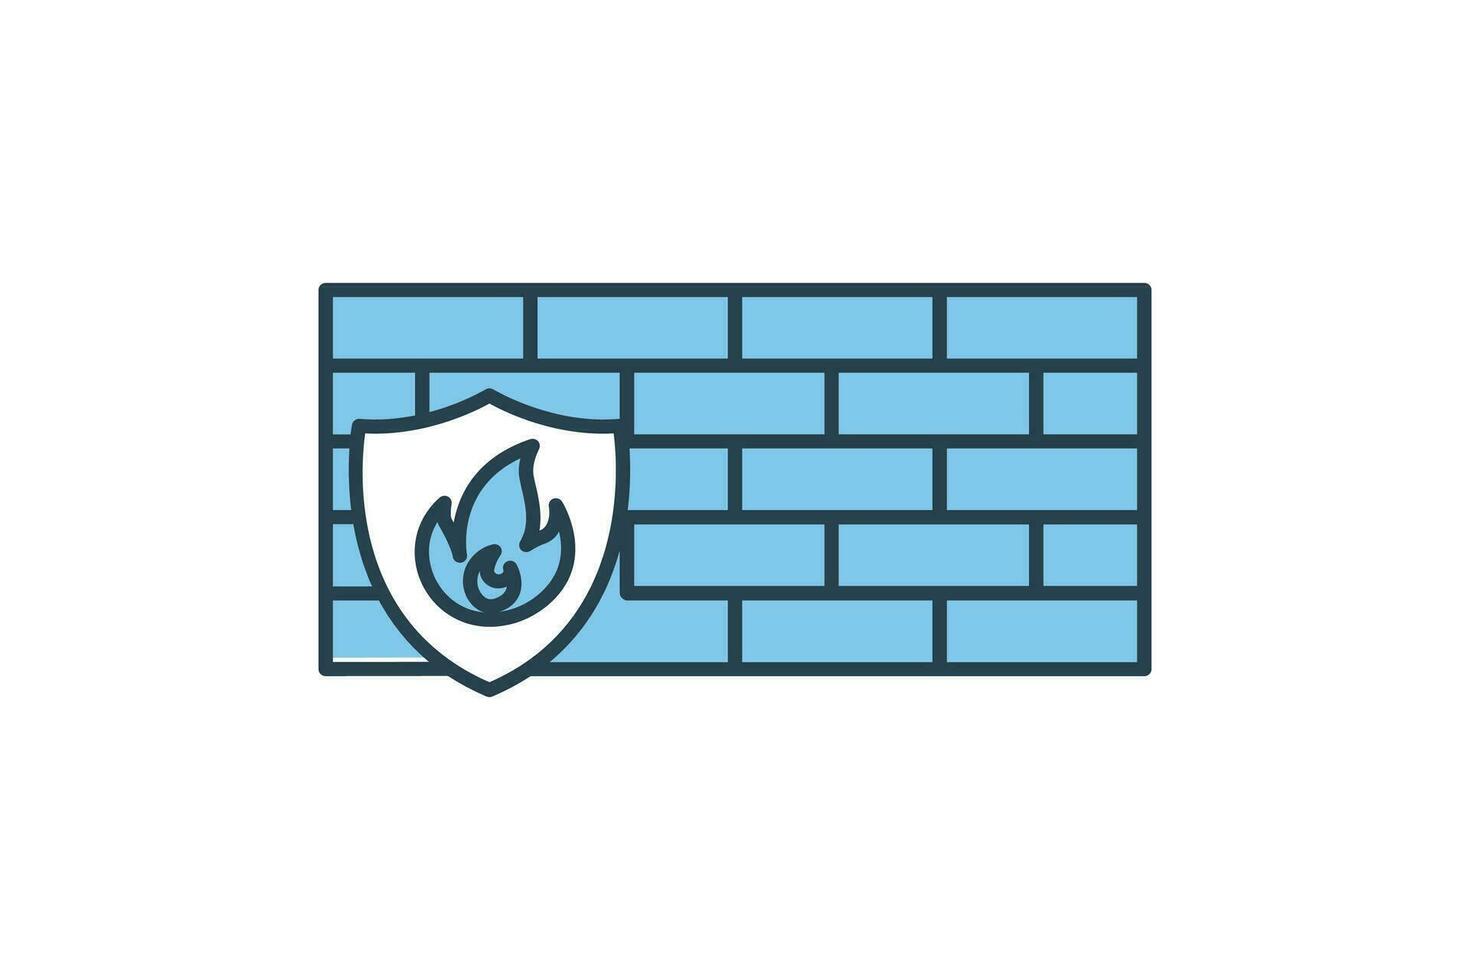 fire wall icon. wall with shields and fire. icon related to device, computer technology. flat line icon style. simple vector design editable